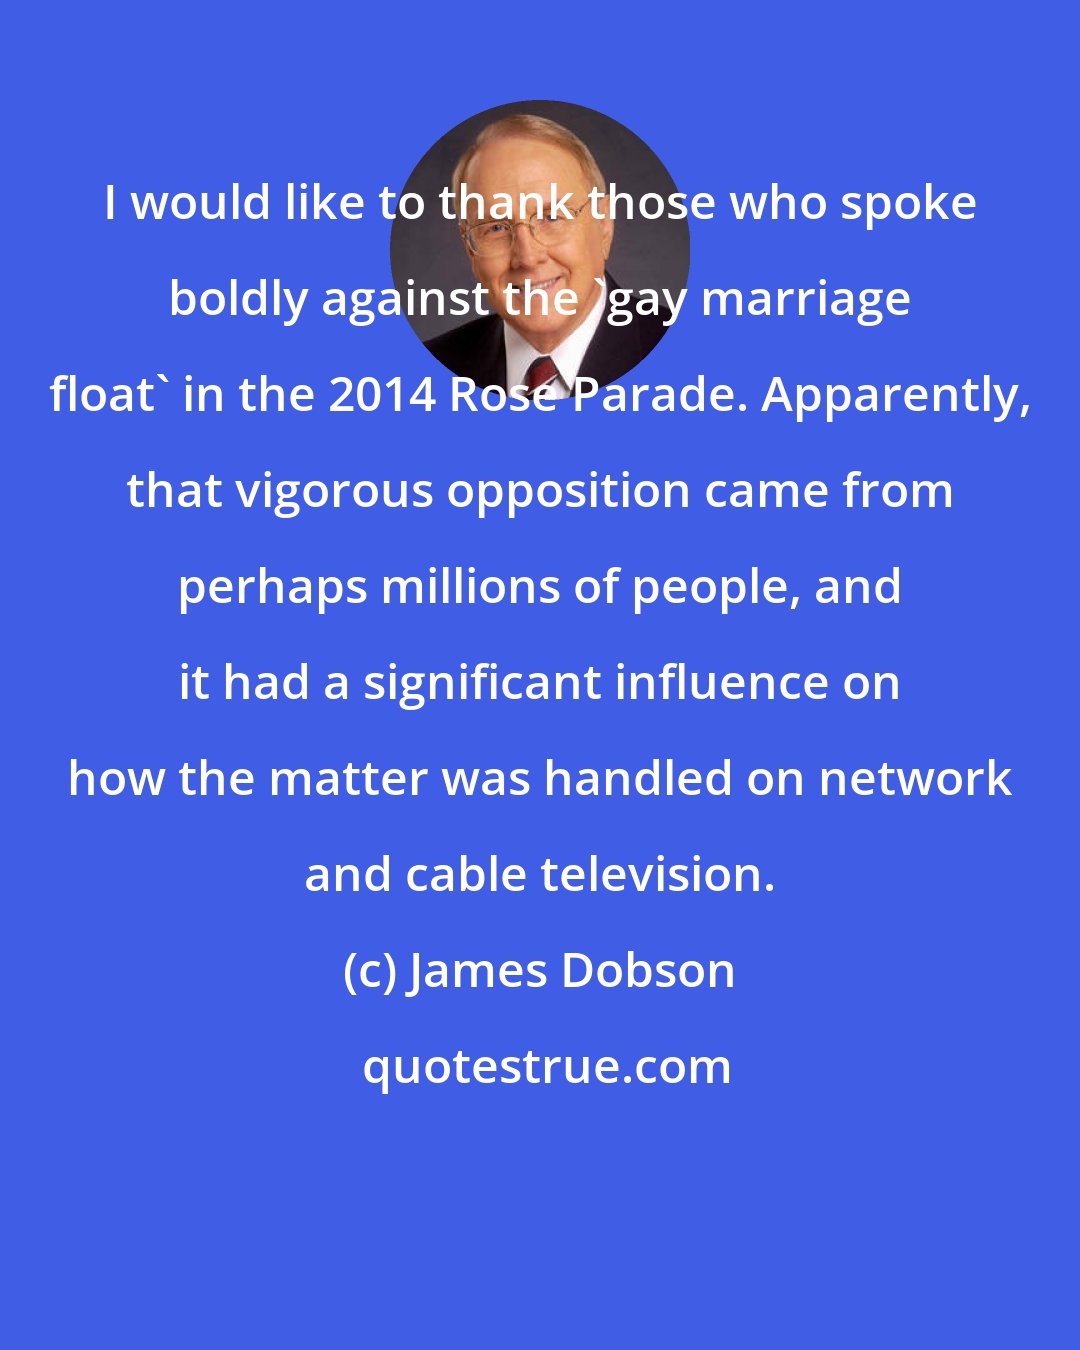 James Dobson: I would like to thank those who spoke boldly against the 'gay marriage float' in the 2014 Rose Parade. Apparently, that vigorous opposition came from perhaps millions of people, and it had a significant influence on how the matter was handled on network and cable television.